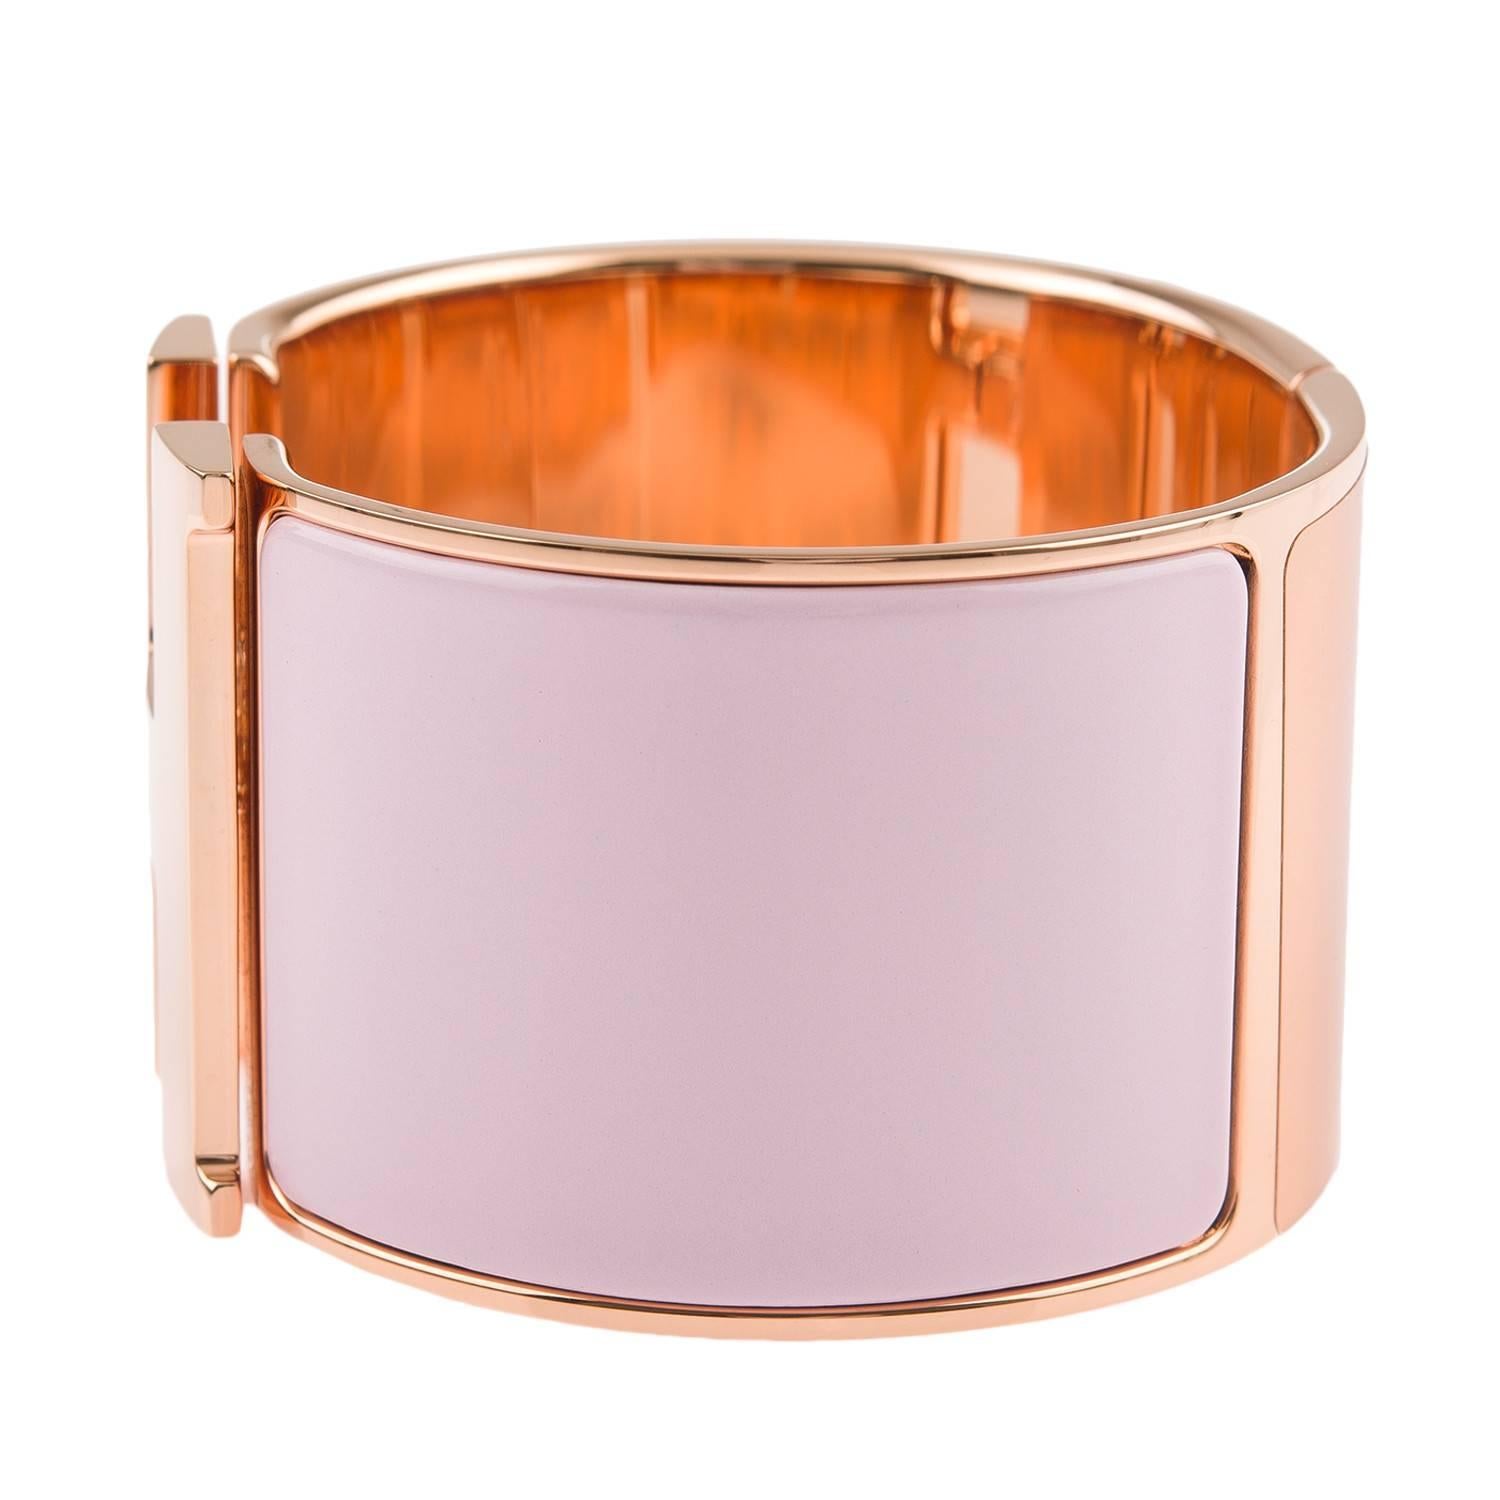 Hermes extra wide Clic Clac H bracelet in rose dragee enamel with gold rose plated hardware in size PM.

Origin: France

Condition: Pristine; never worn and plastic on hardware

Accompanied by: Hermes box, Hermes dustbag, Carebook

Measurements: